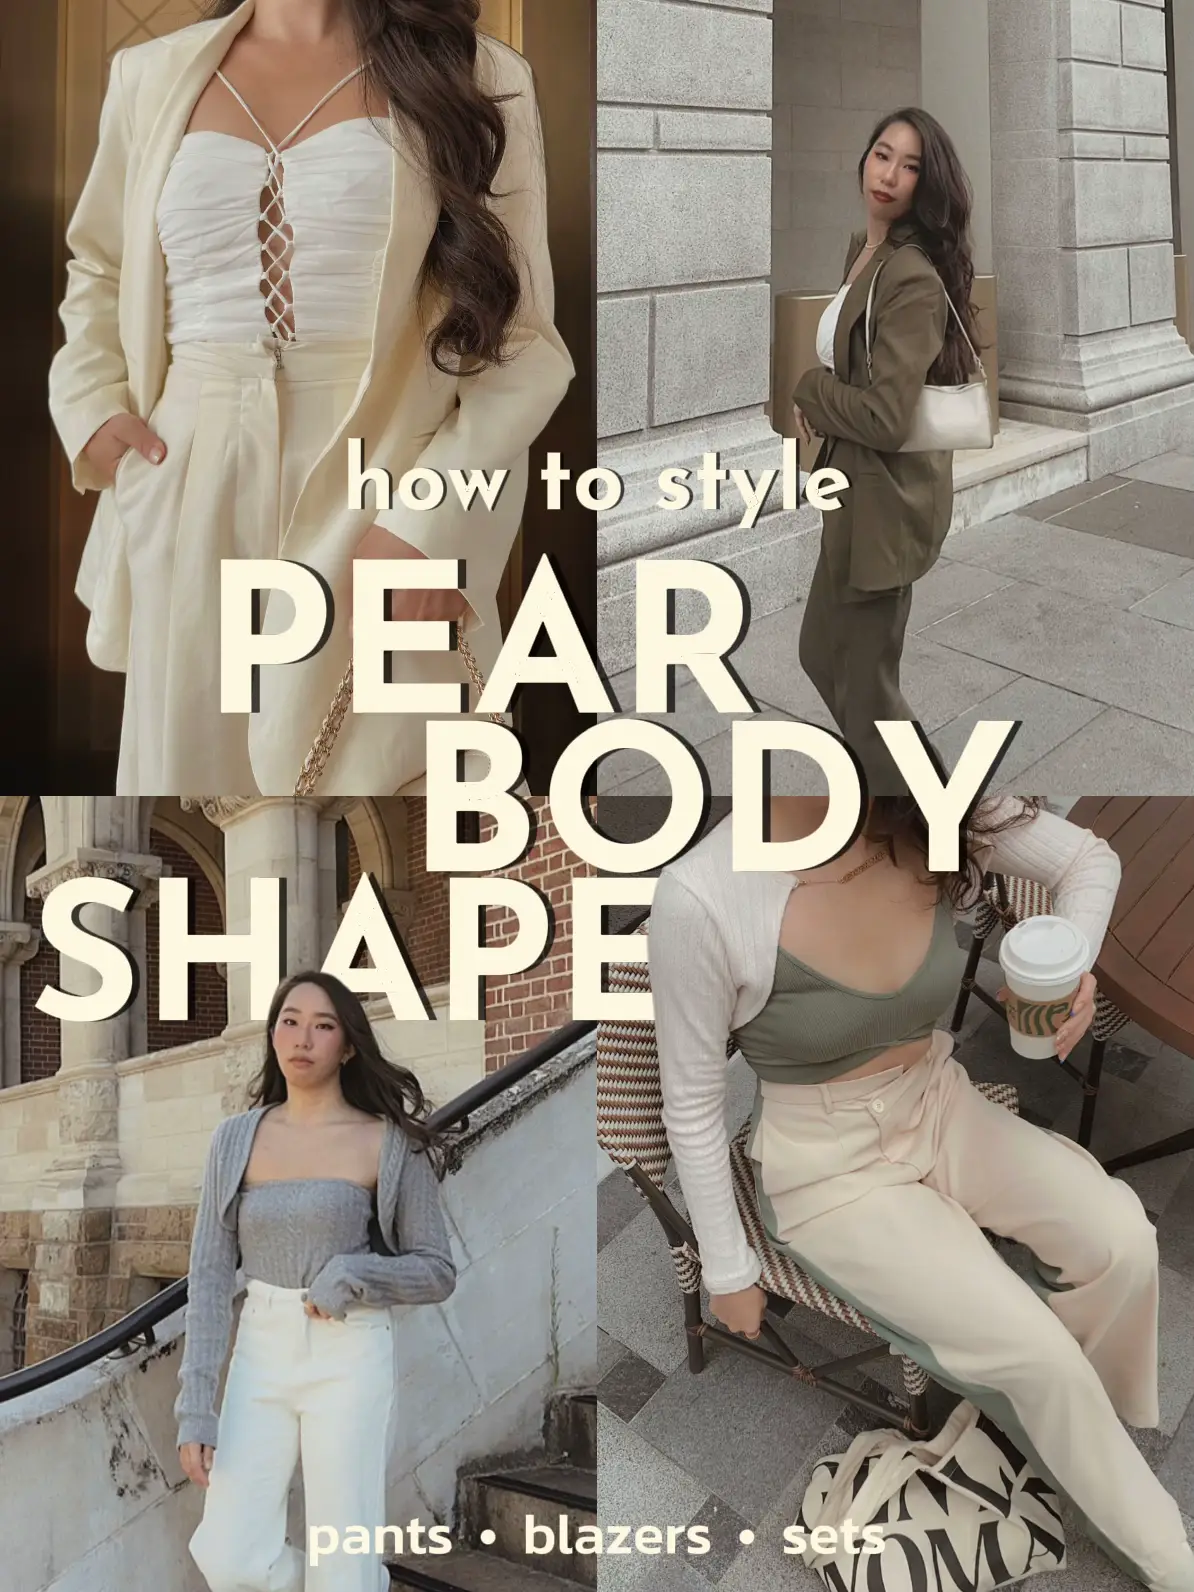 PEAR-SHAPED BODY 101: what's good and what's bad!!, Gallery posted by el  ◡̈